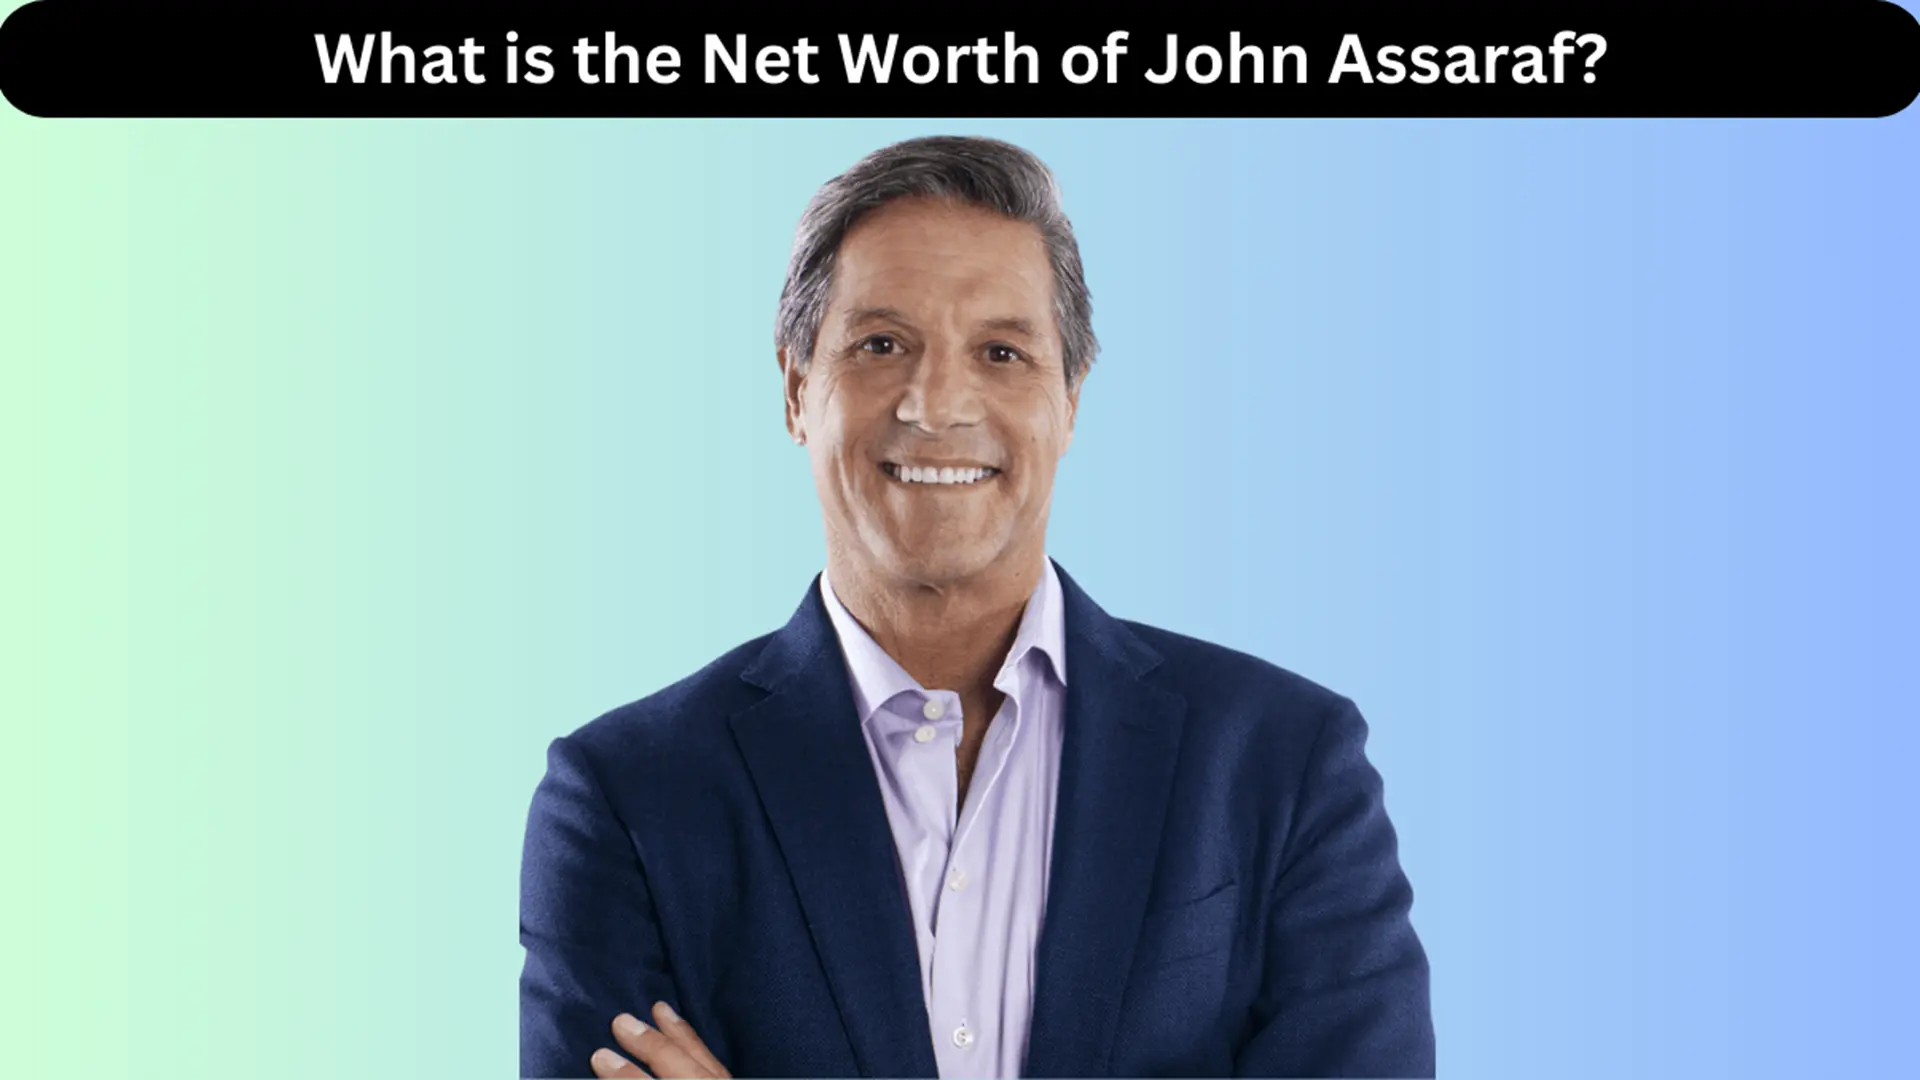 What is the Net Worth of John Assaraf